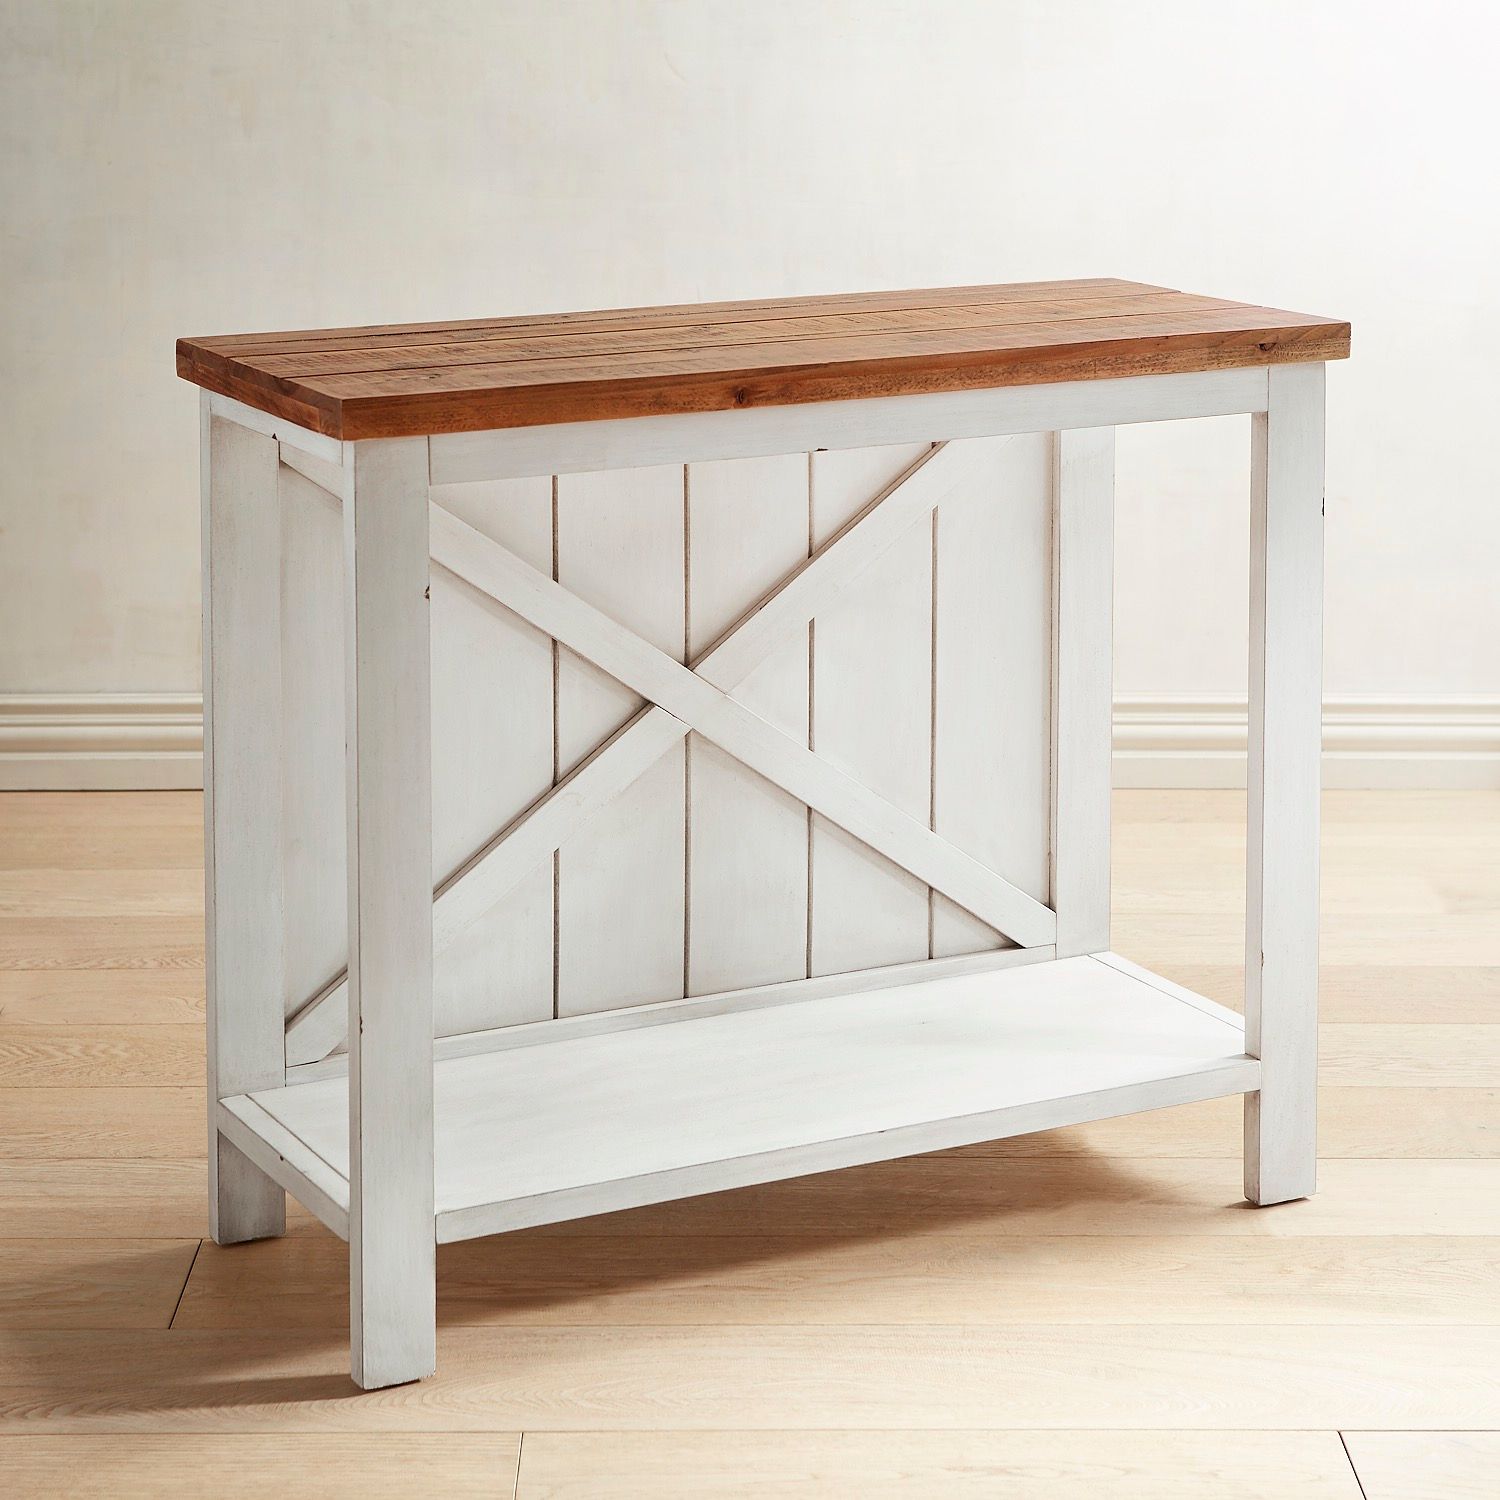 farmhouse white small console table pier imports thin accent kitchen sets with bench large dining linen runner door threshold cover formal room laminate floor trim cast aluminum